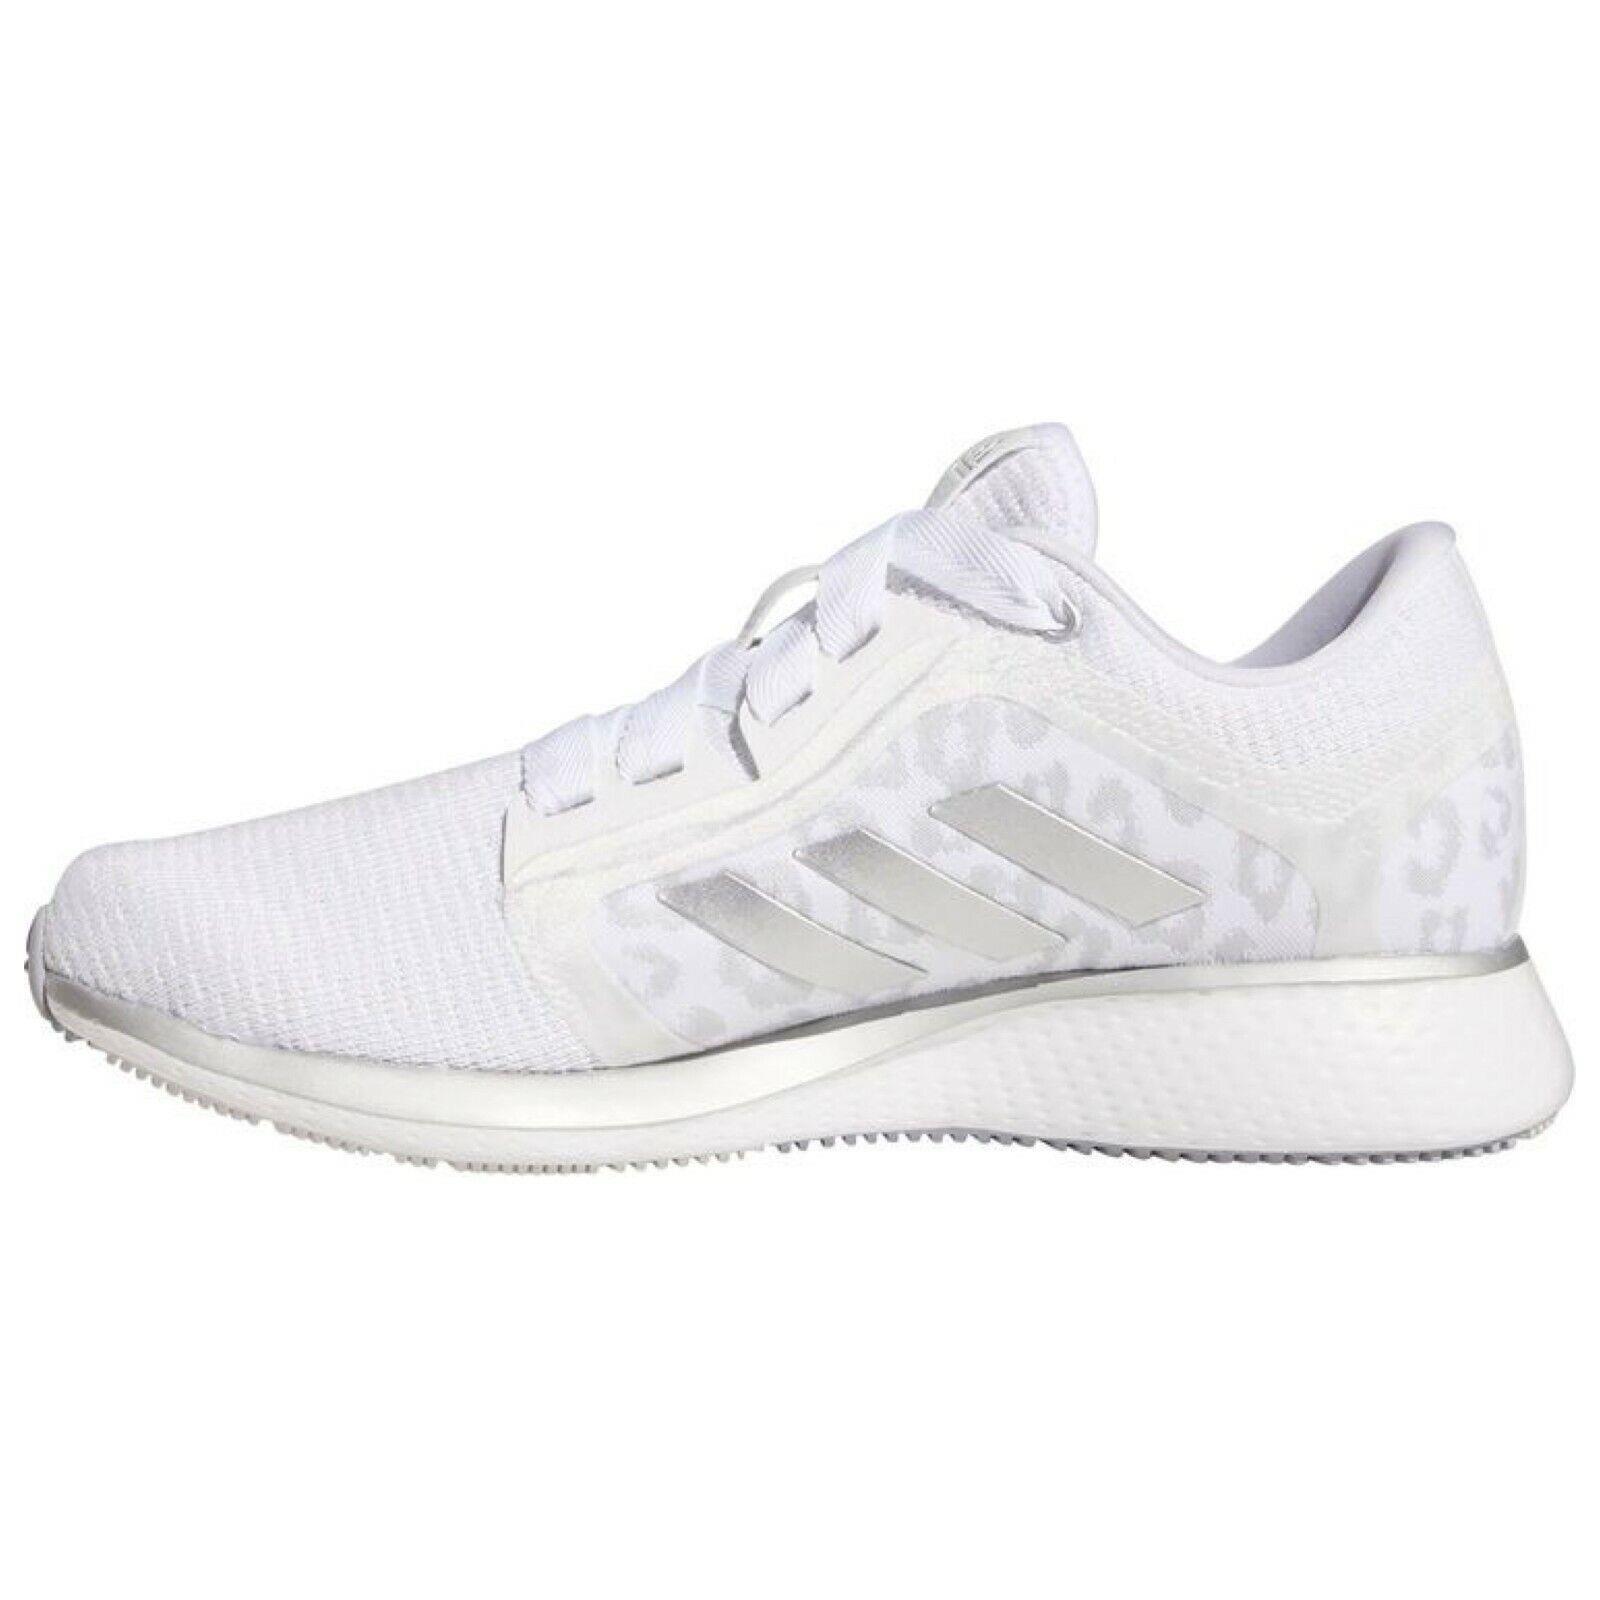 Adidas shoes Edge Lux - White , GREY/WHITE/LEOPARD Manufacturer 7